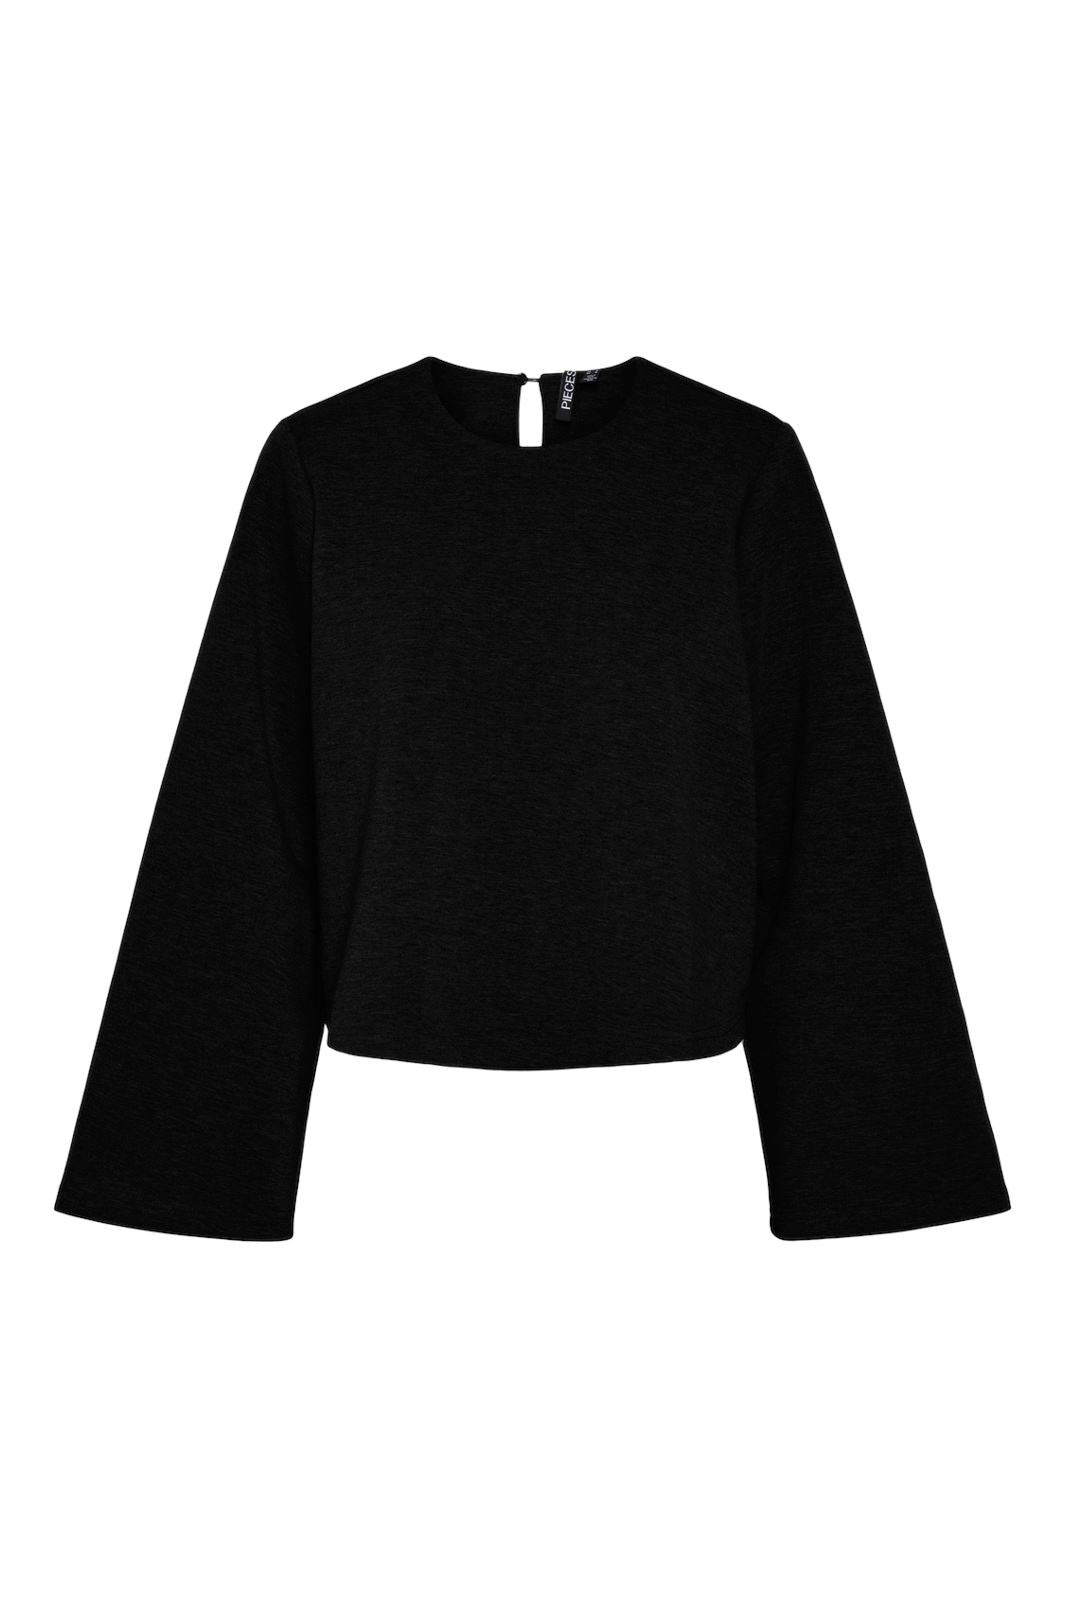 Pieces - Pcfilly Ls Sweat - 4594323 Black